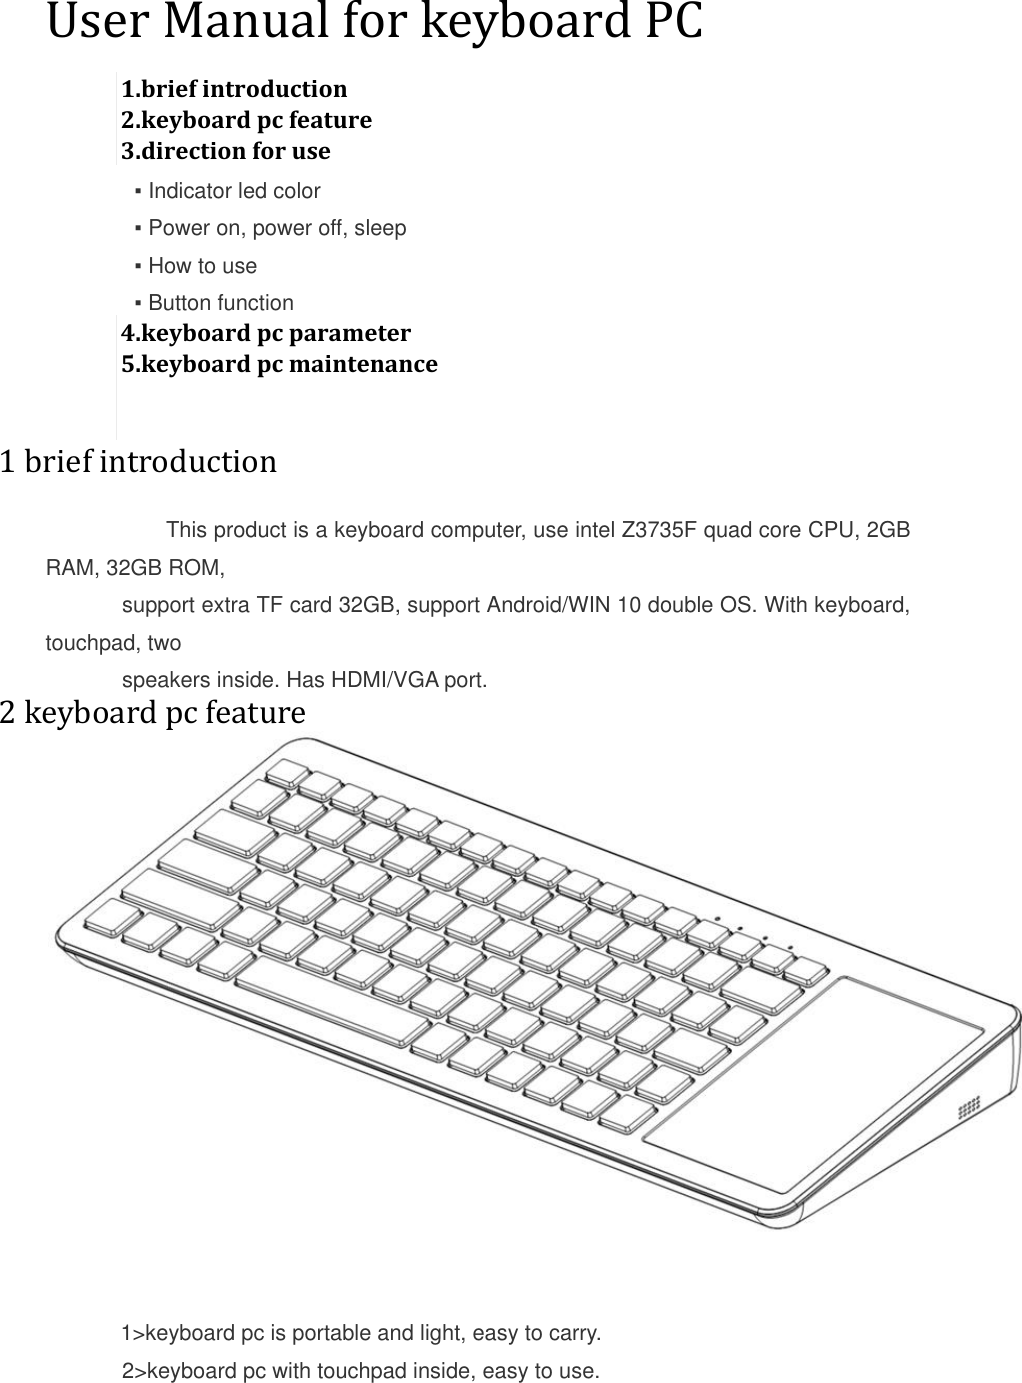  User Manual for keyboard PC 1.brief introduction 2.keyboard pc feature 3.direction for use   ▪ Indicator led color   ▪ Power on, power off, sleep   ▪ How to use   ▪ Button function 4.keyboard pc parameter 5.keyboard pc maintenance   1 brief introduction      This product is a keyboard computer, use intel Z3735F quad core CPU, 2GB RAM, 32GB ROM,  support extra TF card 32GB, support Android/WIN 10 double OS. With keyboard, touchpad, two  speakers inside. Has HDMI/VGA port. 2 keyboard pc feature          1&gt;keyboard pc is portable and light, easy to carry. 2&gt;keyboard pc with touchpad inside, easy to use. 